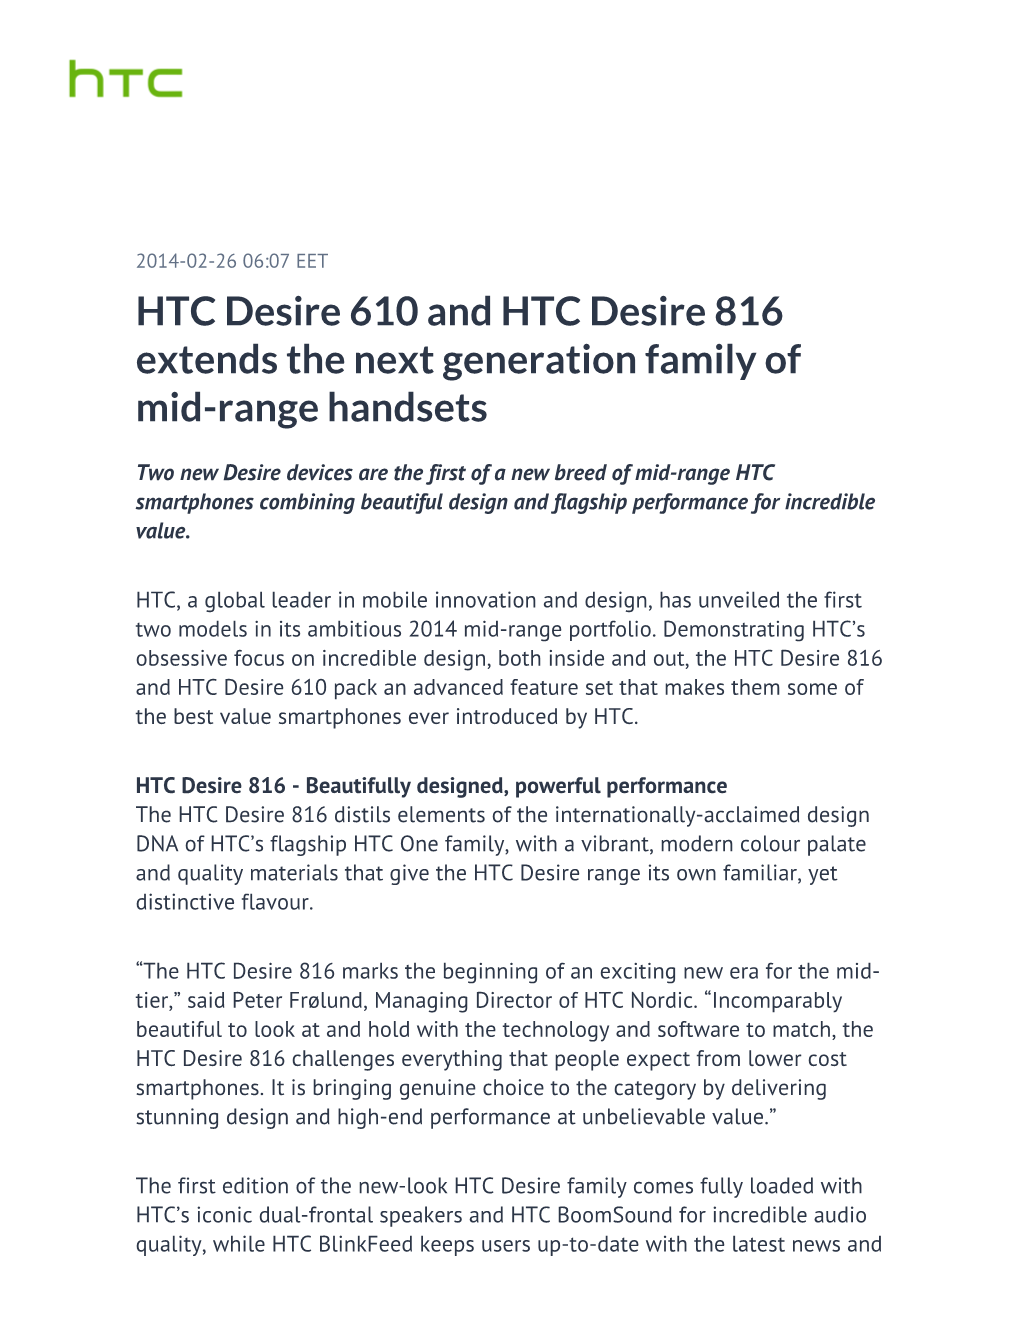 HTC Desire 610 and HTC Desire 816 Extends the Next Generation Family of Mid-Range Handsets